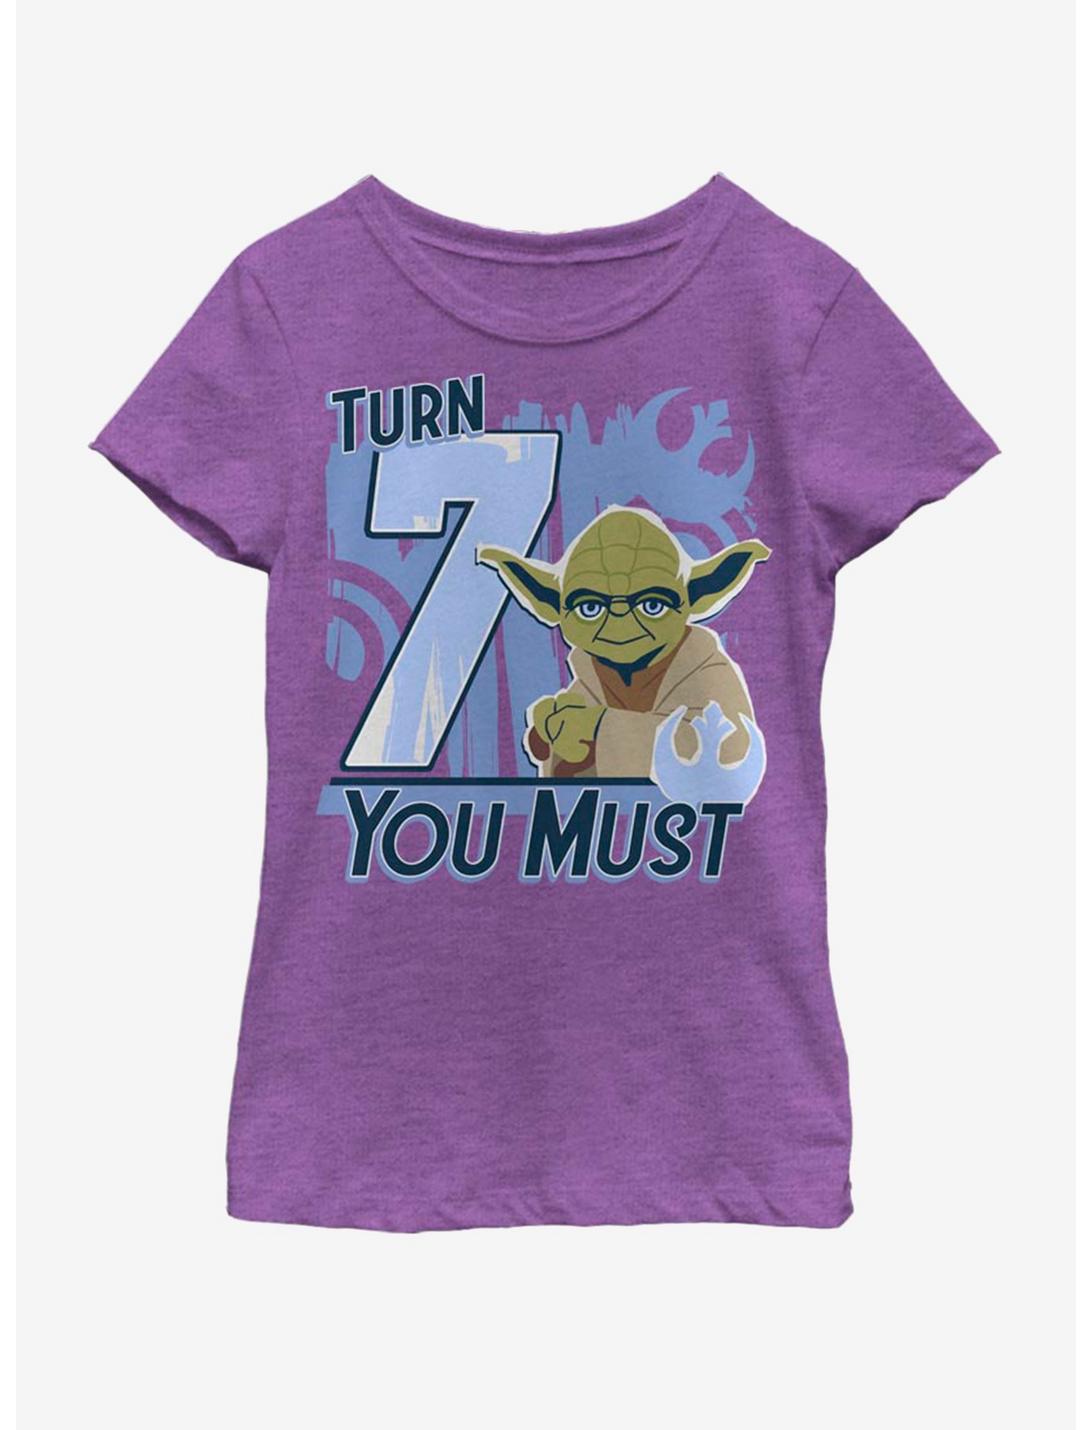 Star Wars Turn 7 you Must Youth Girls T-Shirt, PURPLE BERRY, hi-res